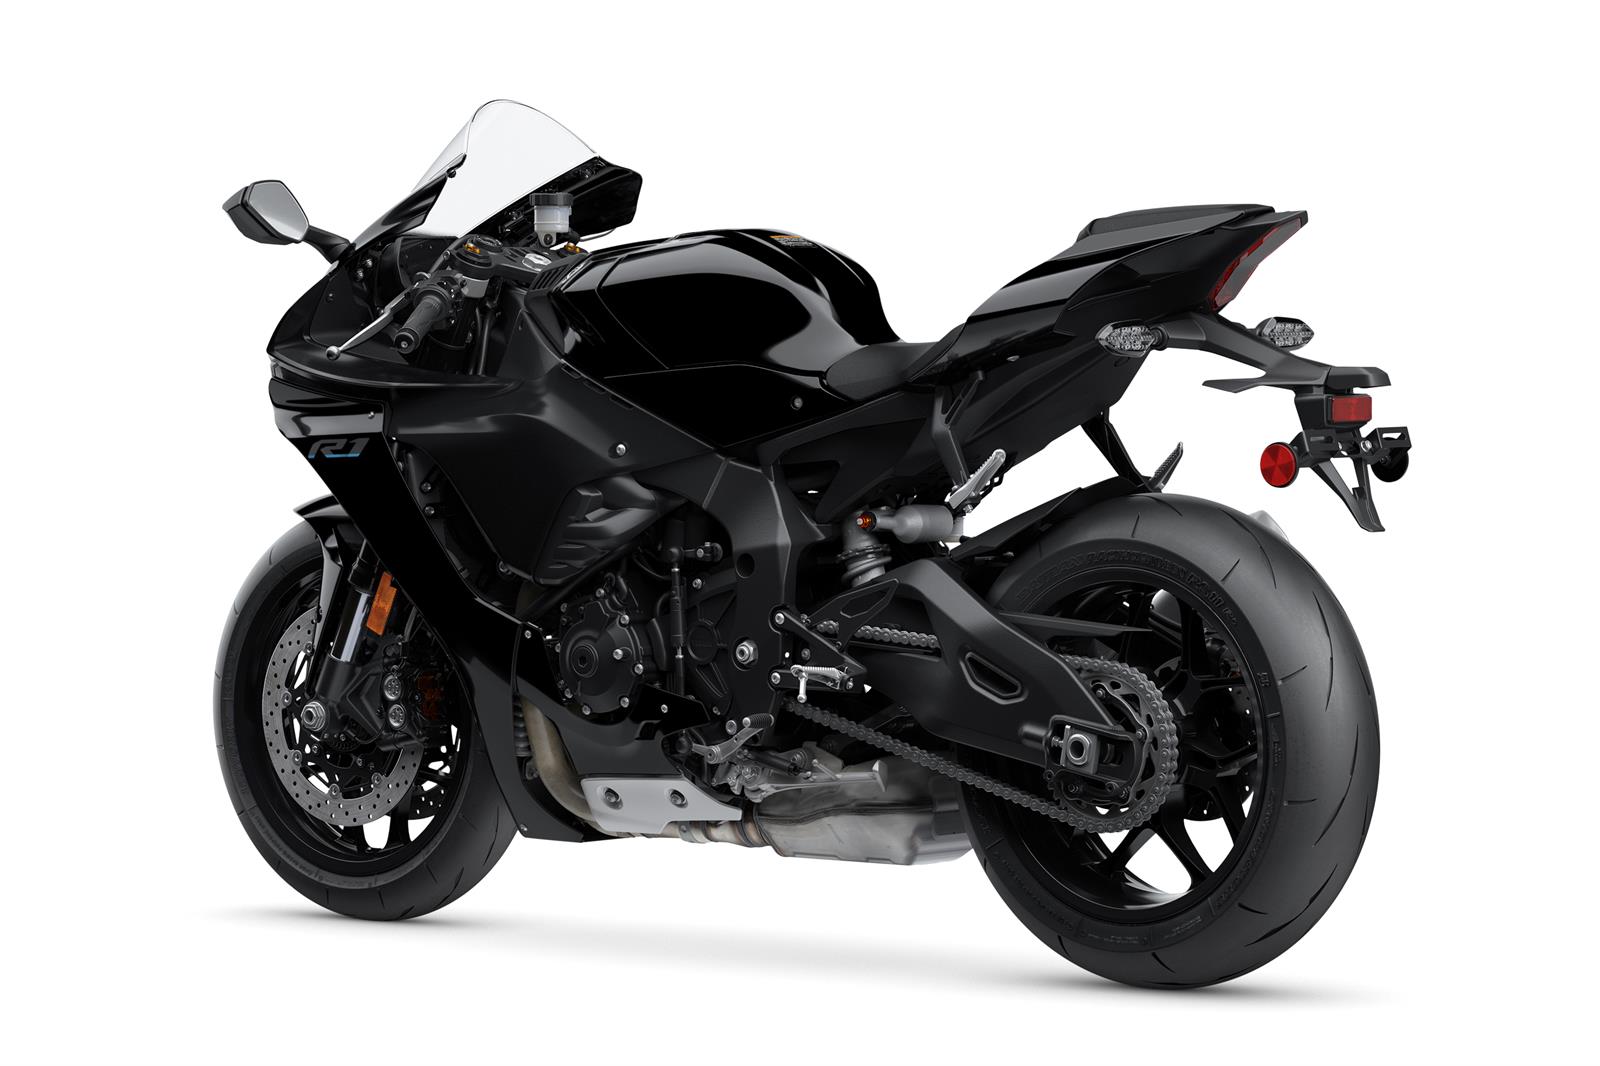 2022 Yamaha YZF R1 / R1M [Specs, Features, Photo]